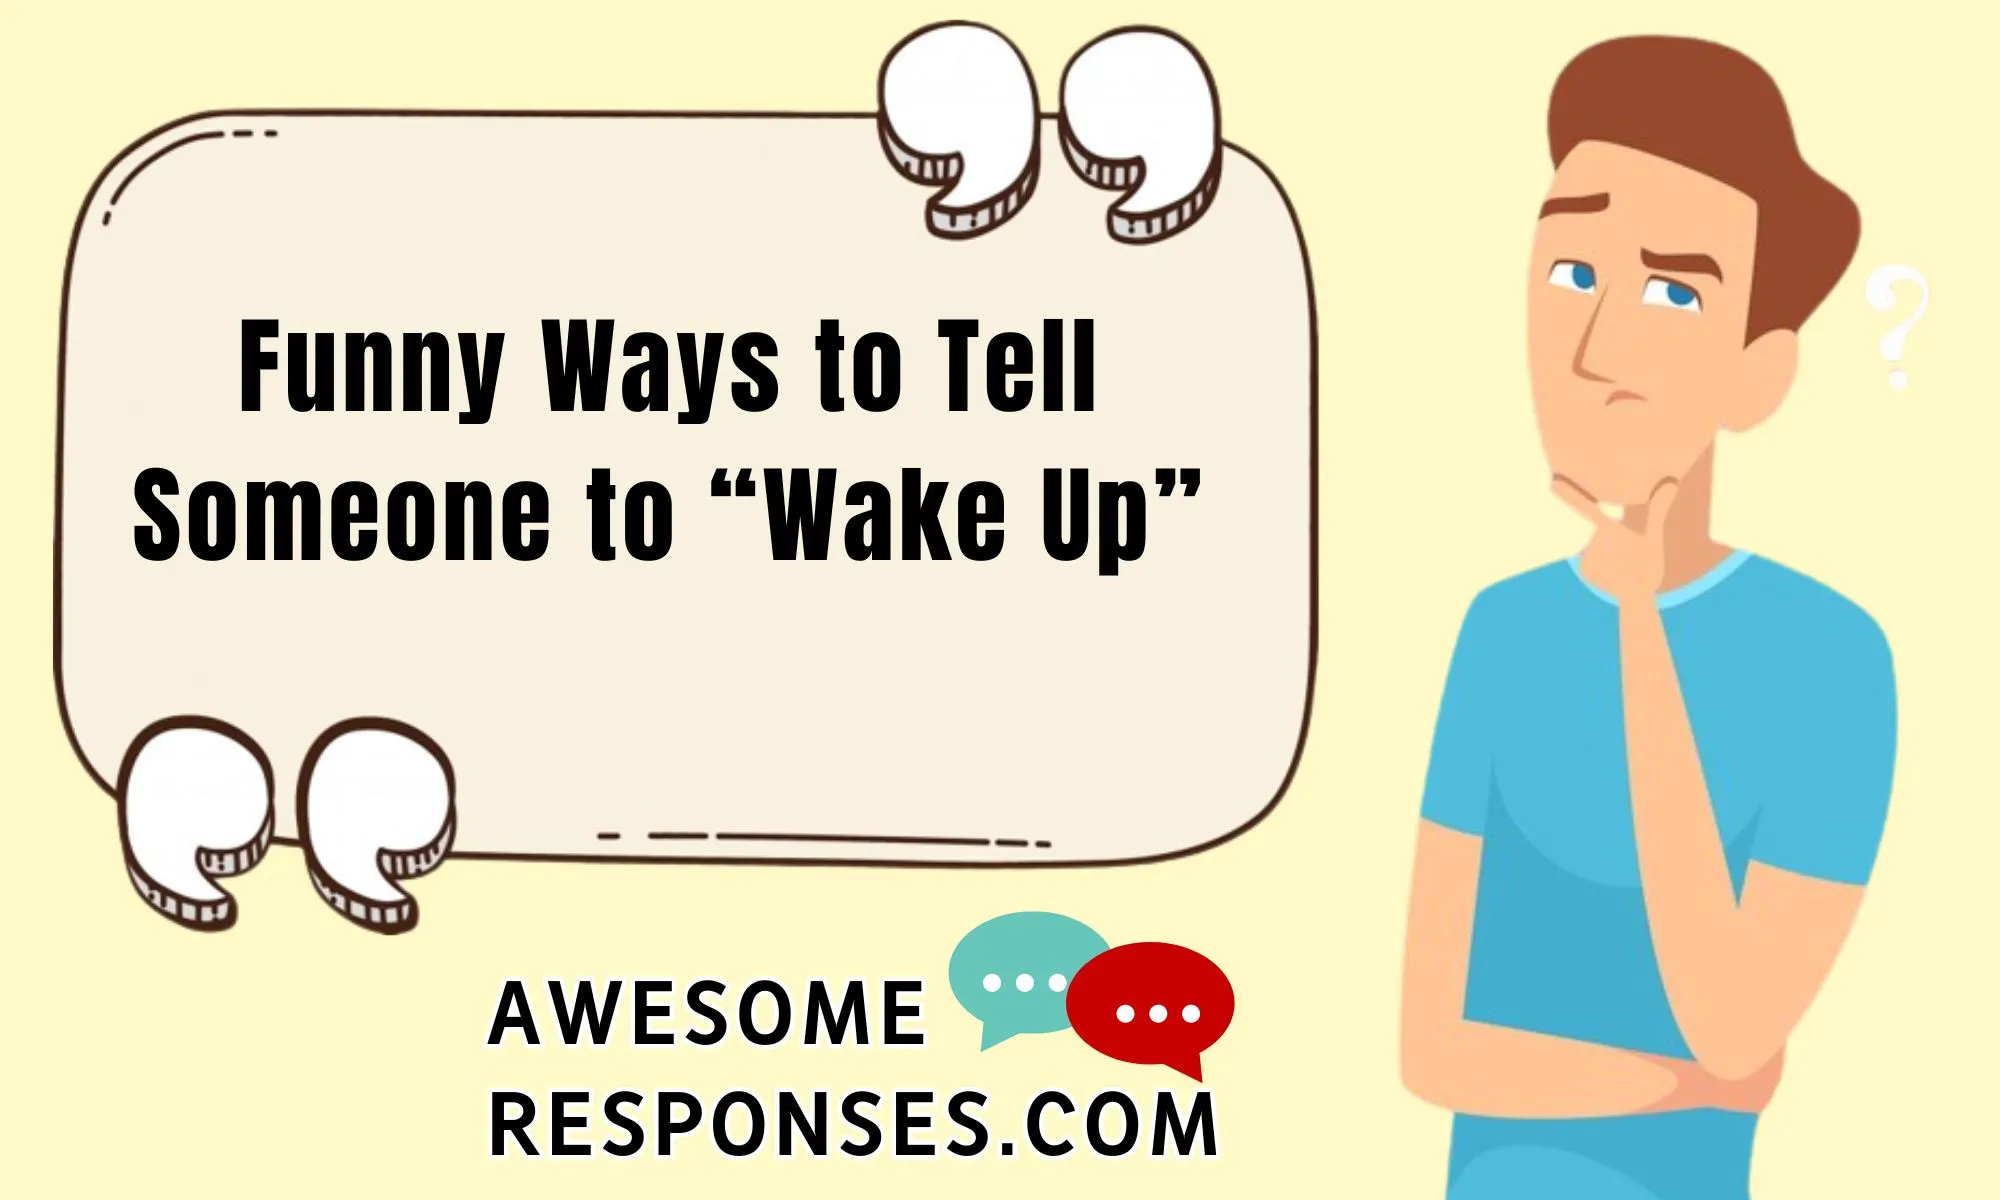 Funny Ways to Tell Someone to “Wake Up”